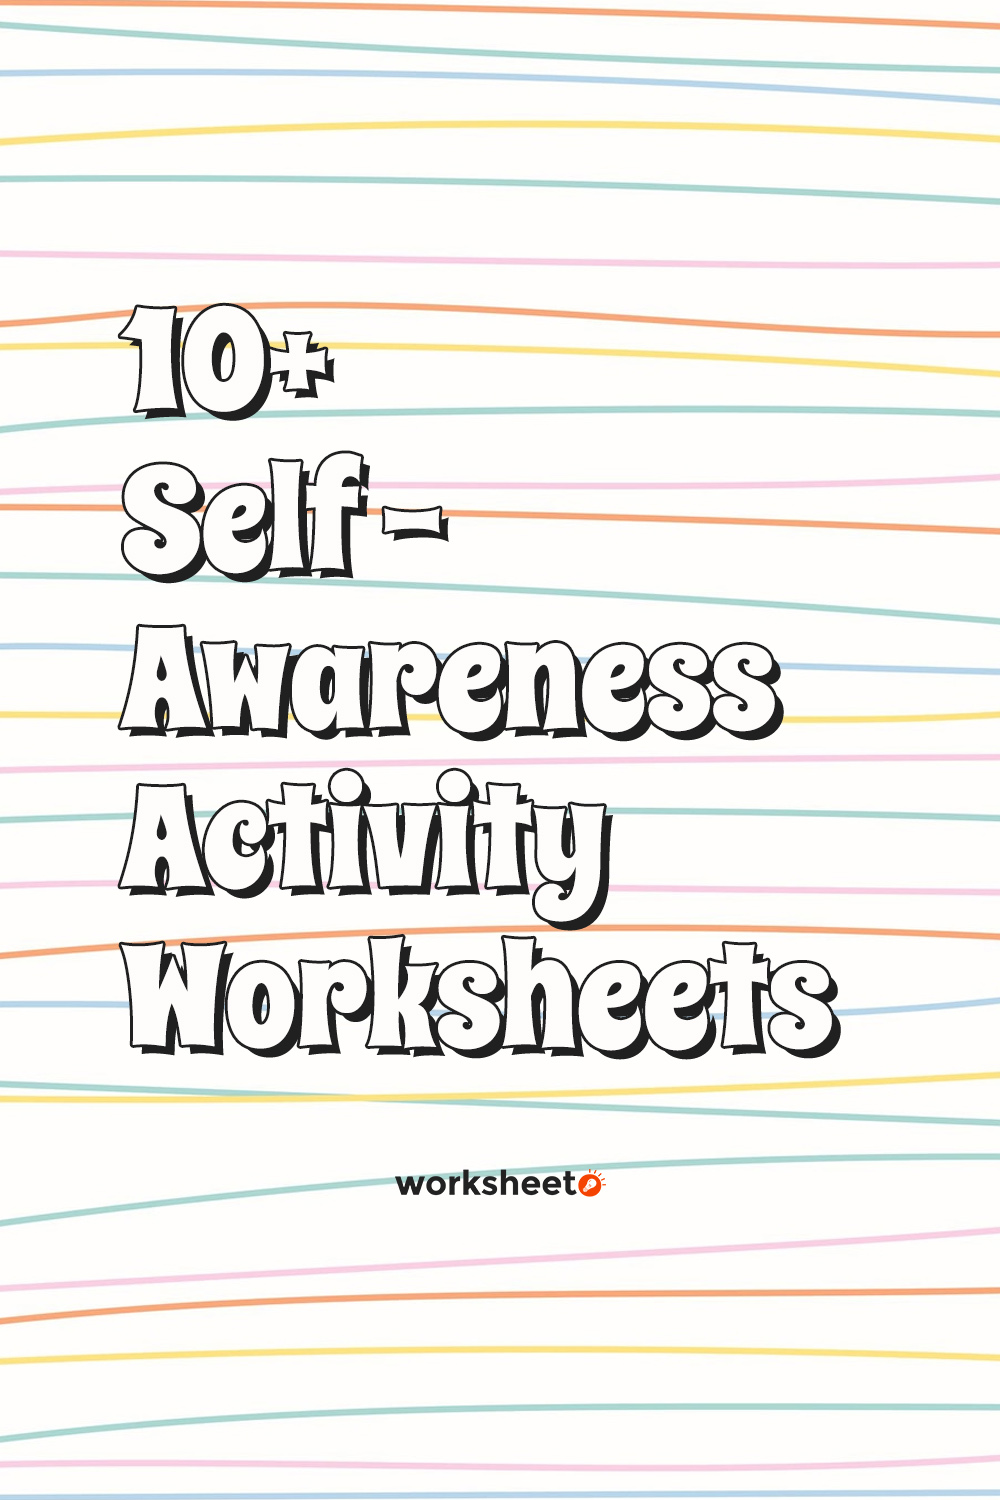 14 Images of Self -Awareness Activity Worksheets